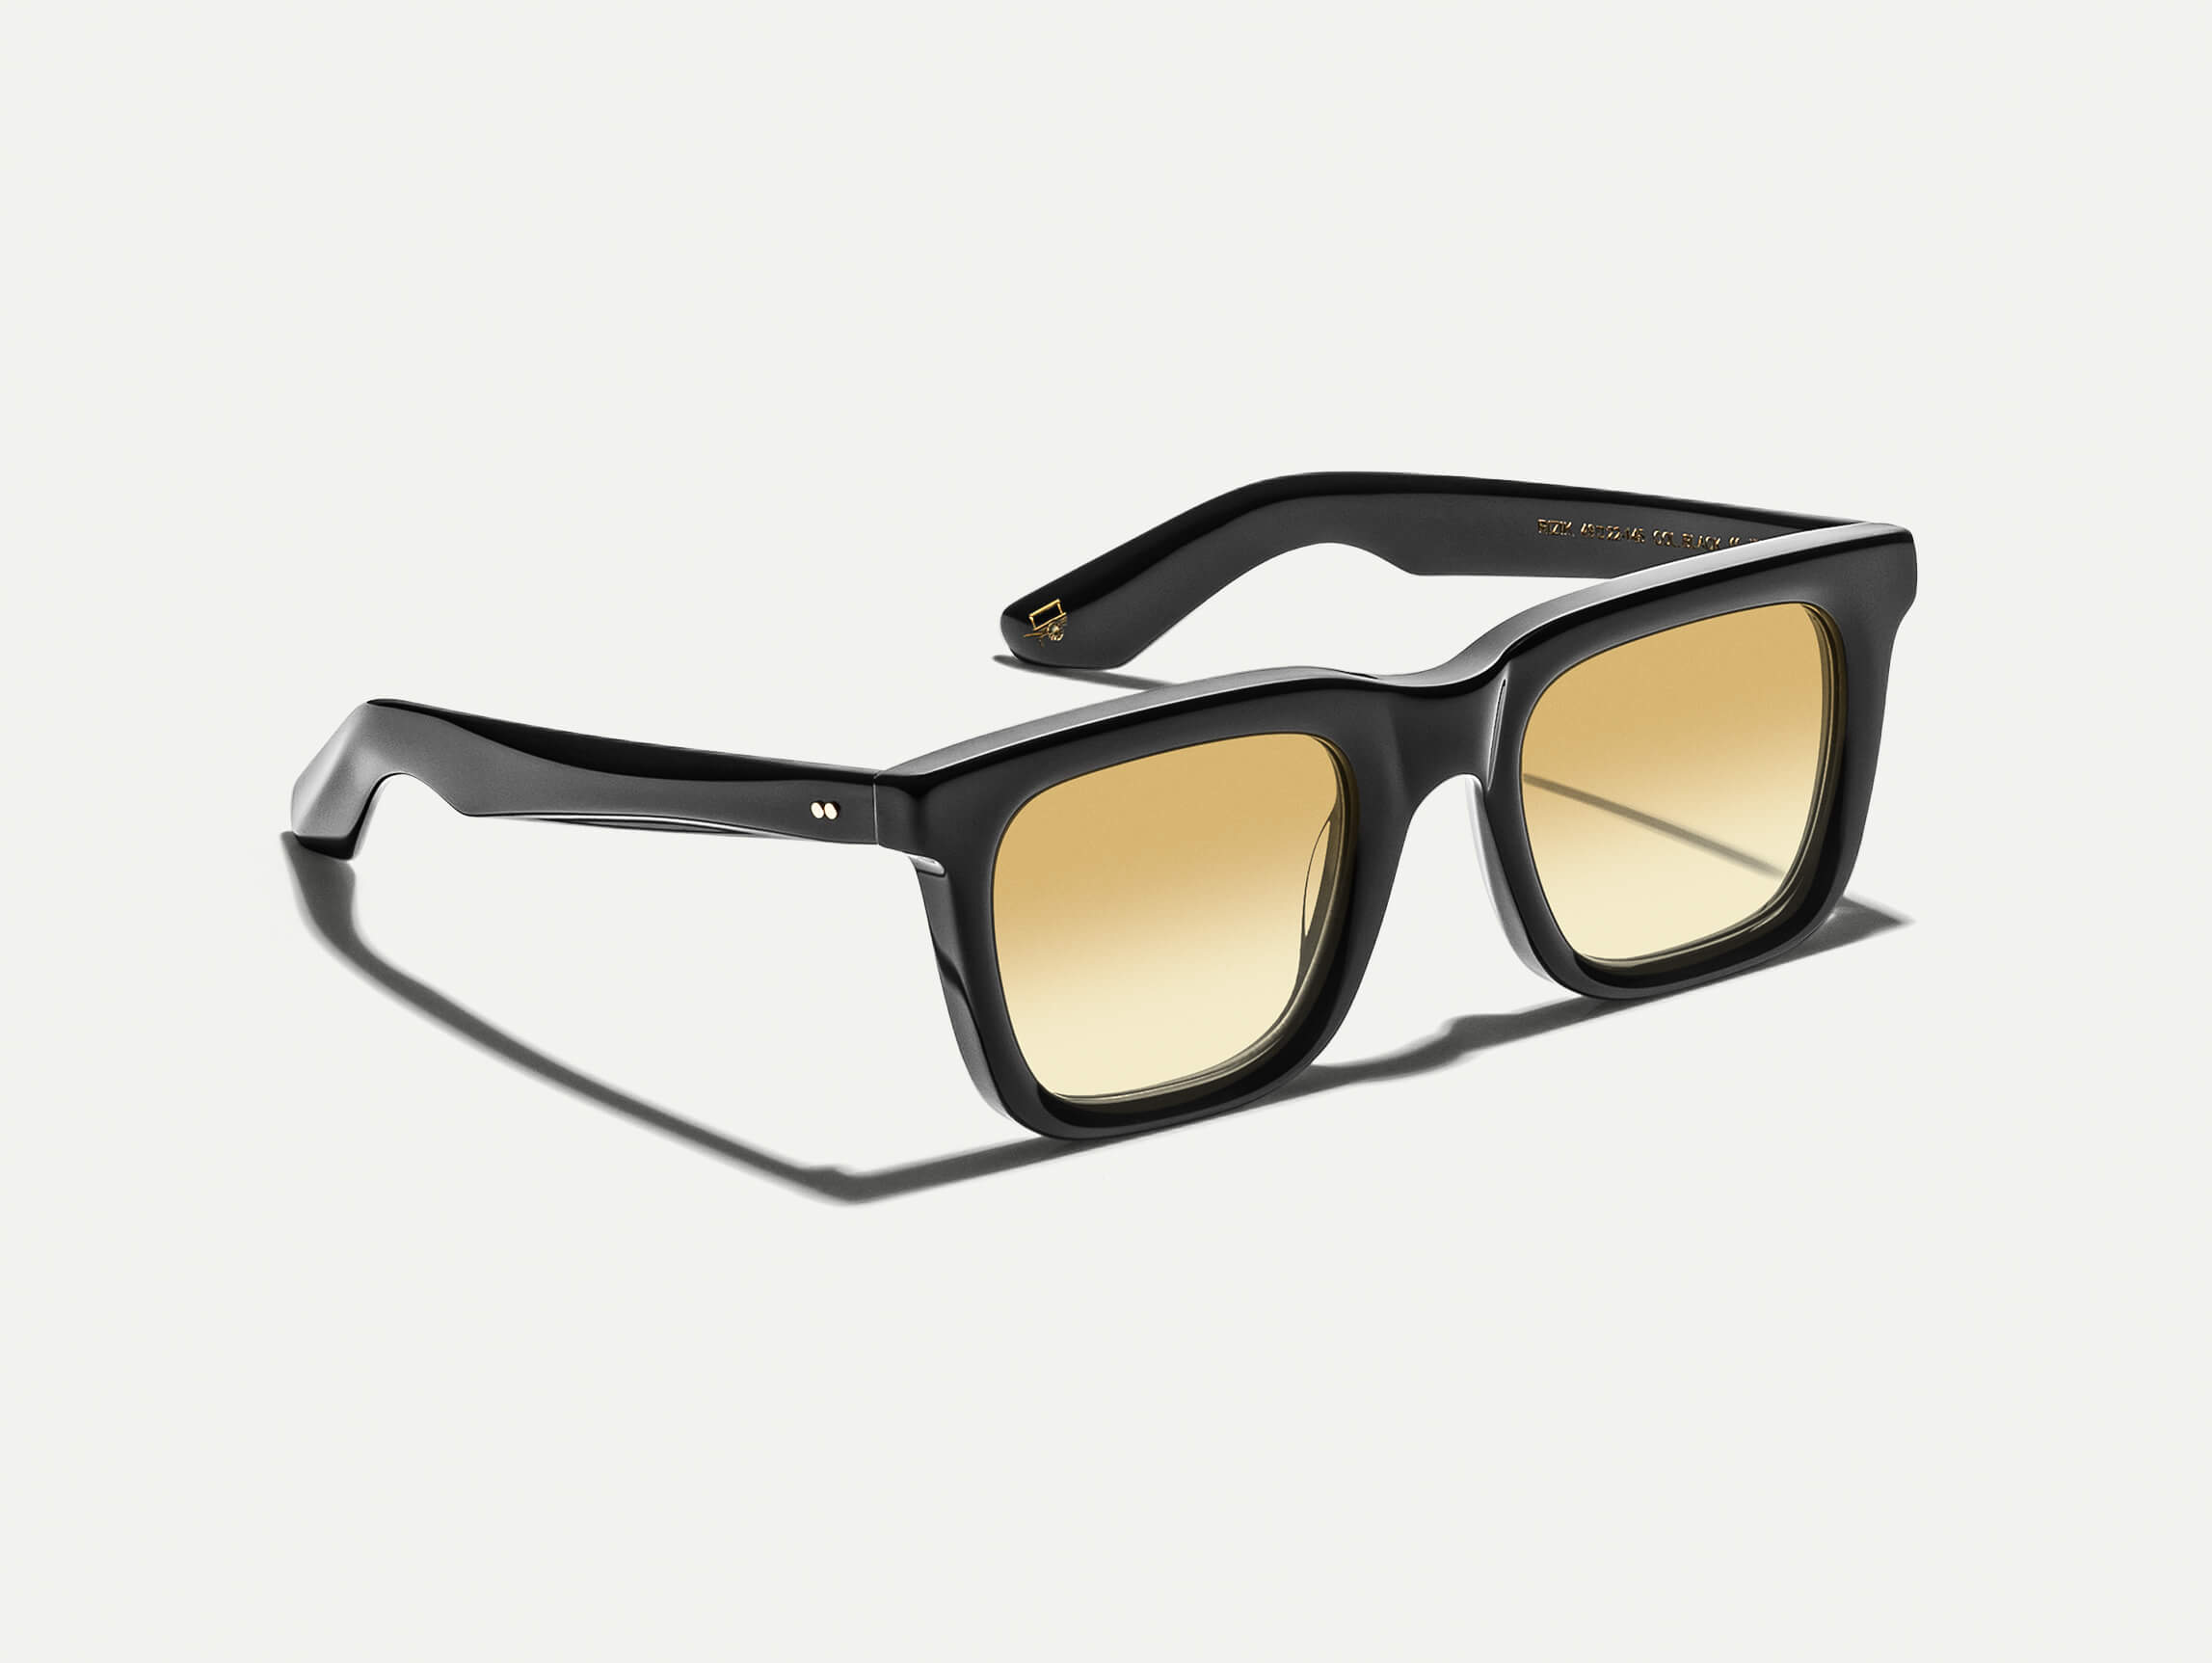 The RIZIK Black with Chestnut Fade Tinted Lenses